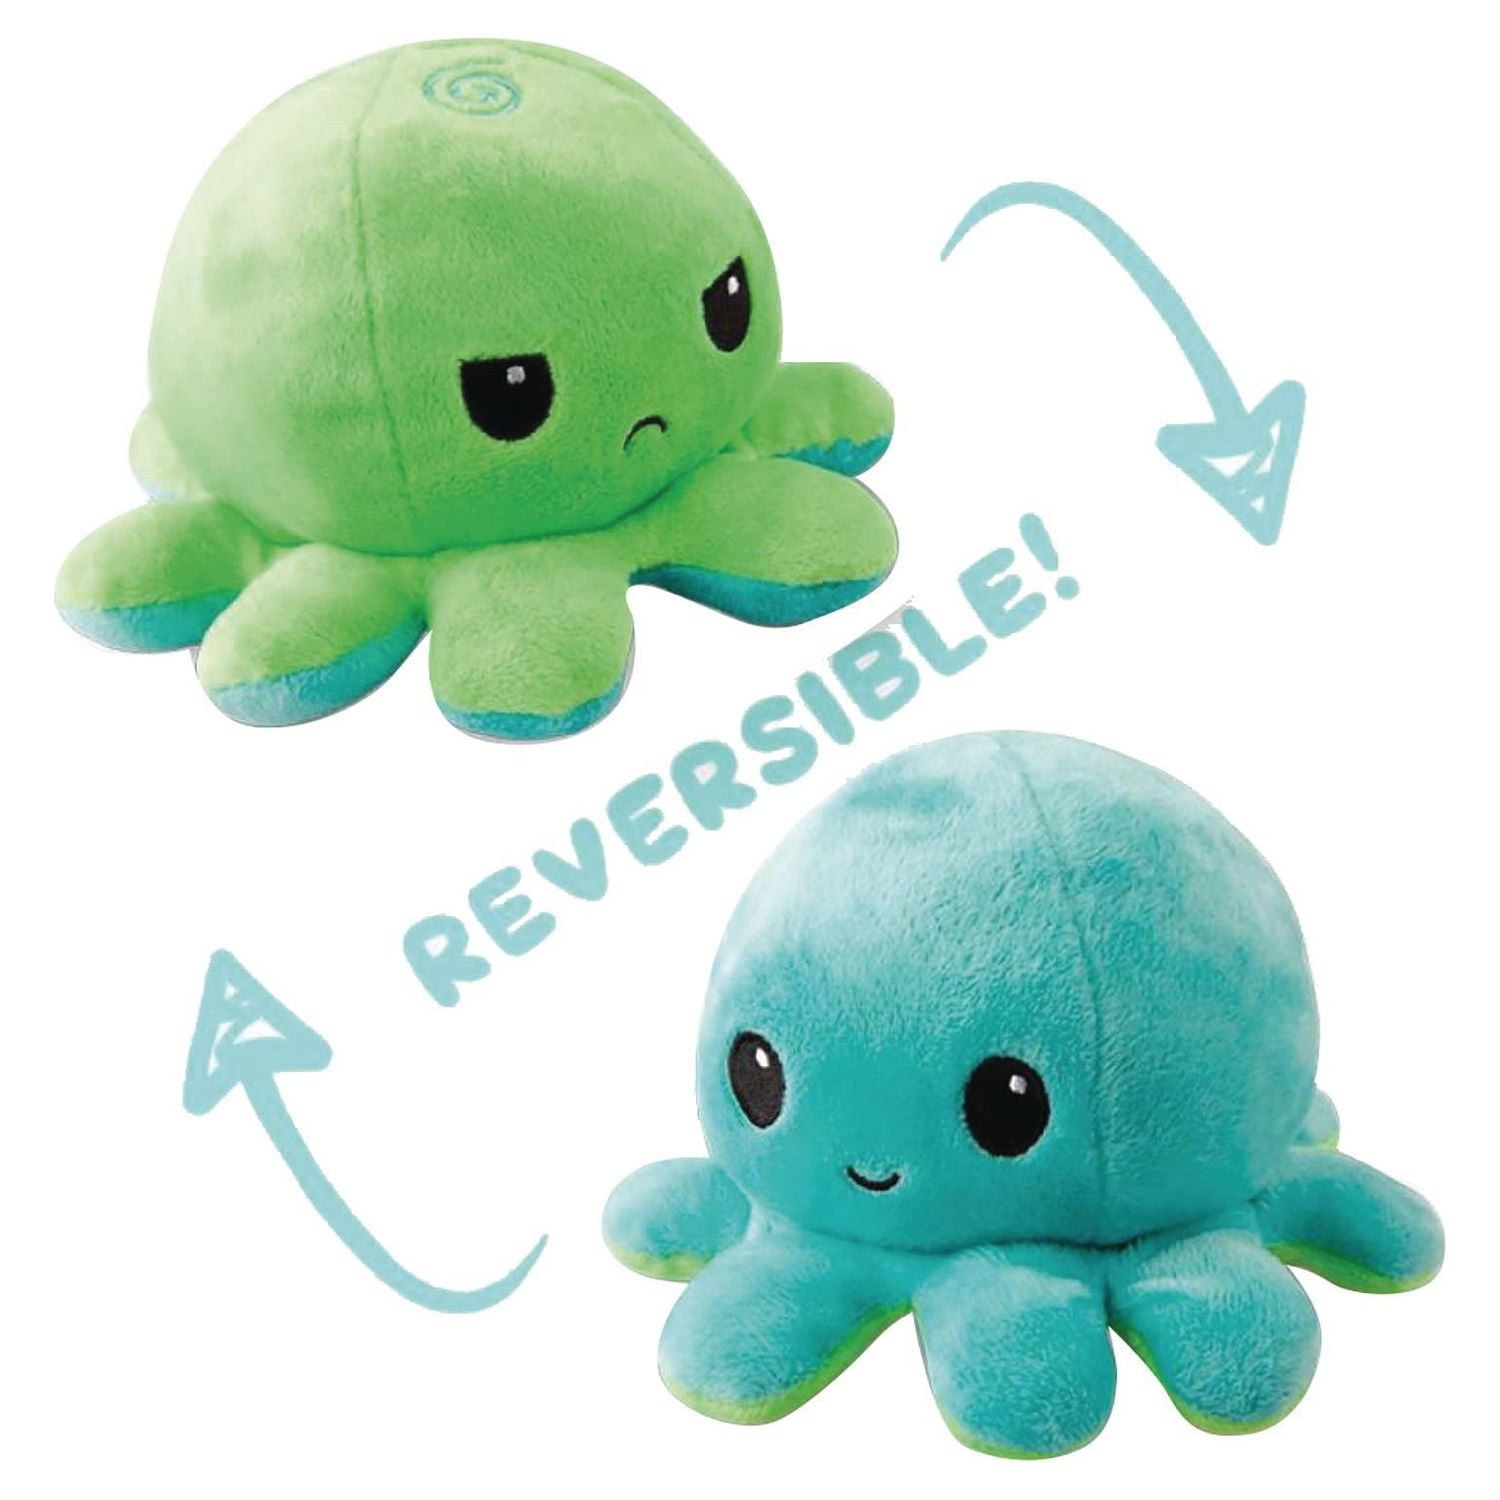 TeeTurtle, The Moody Reversible Octopus Plushie, Patented Design, Sensory Fidget Toy for Stress Relief, Green + Aqua, Happy + Sad